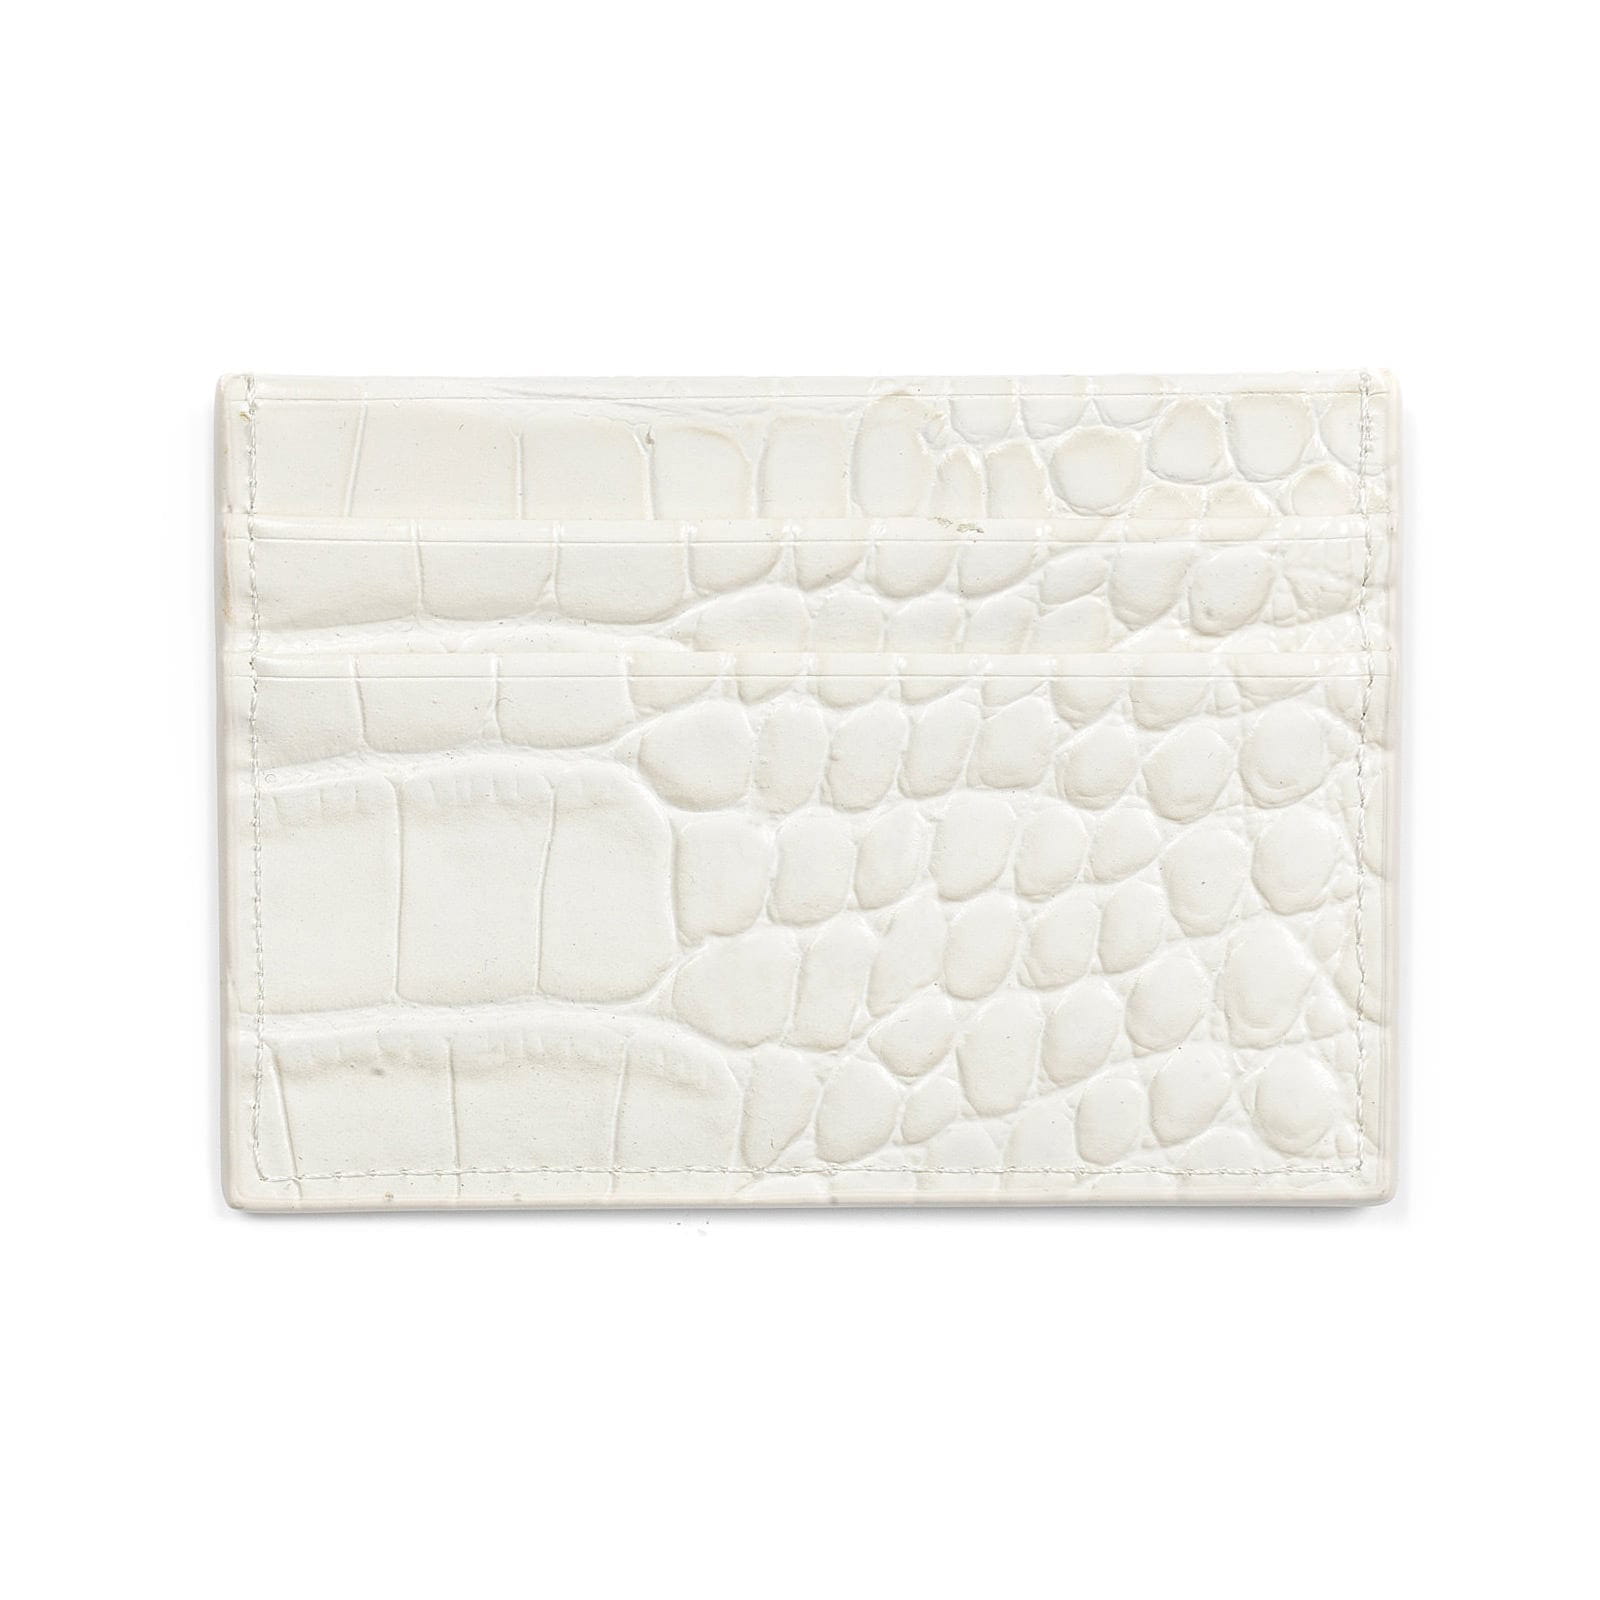 Blank Personalised White Croc Leather Card Holder